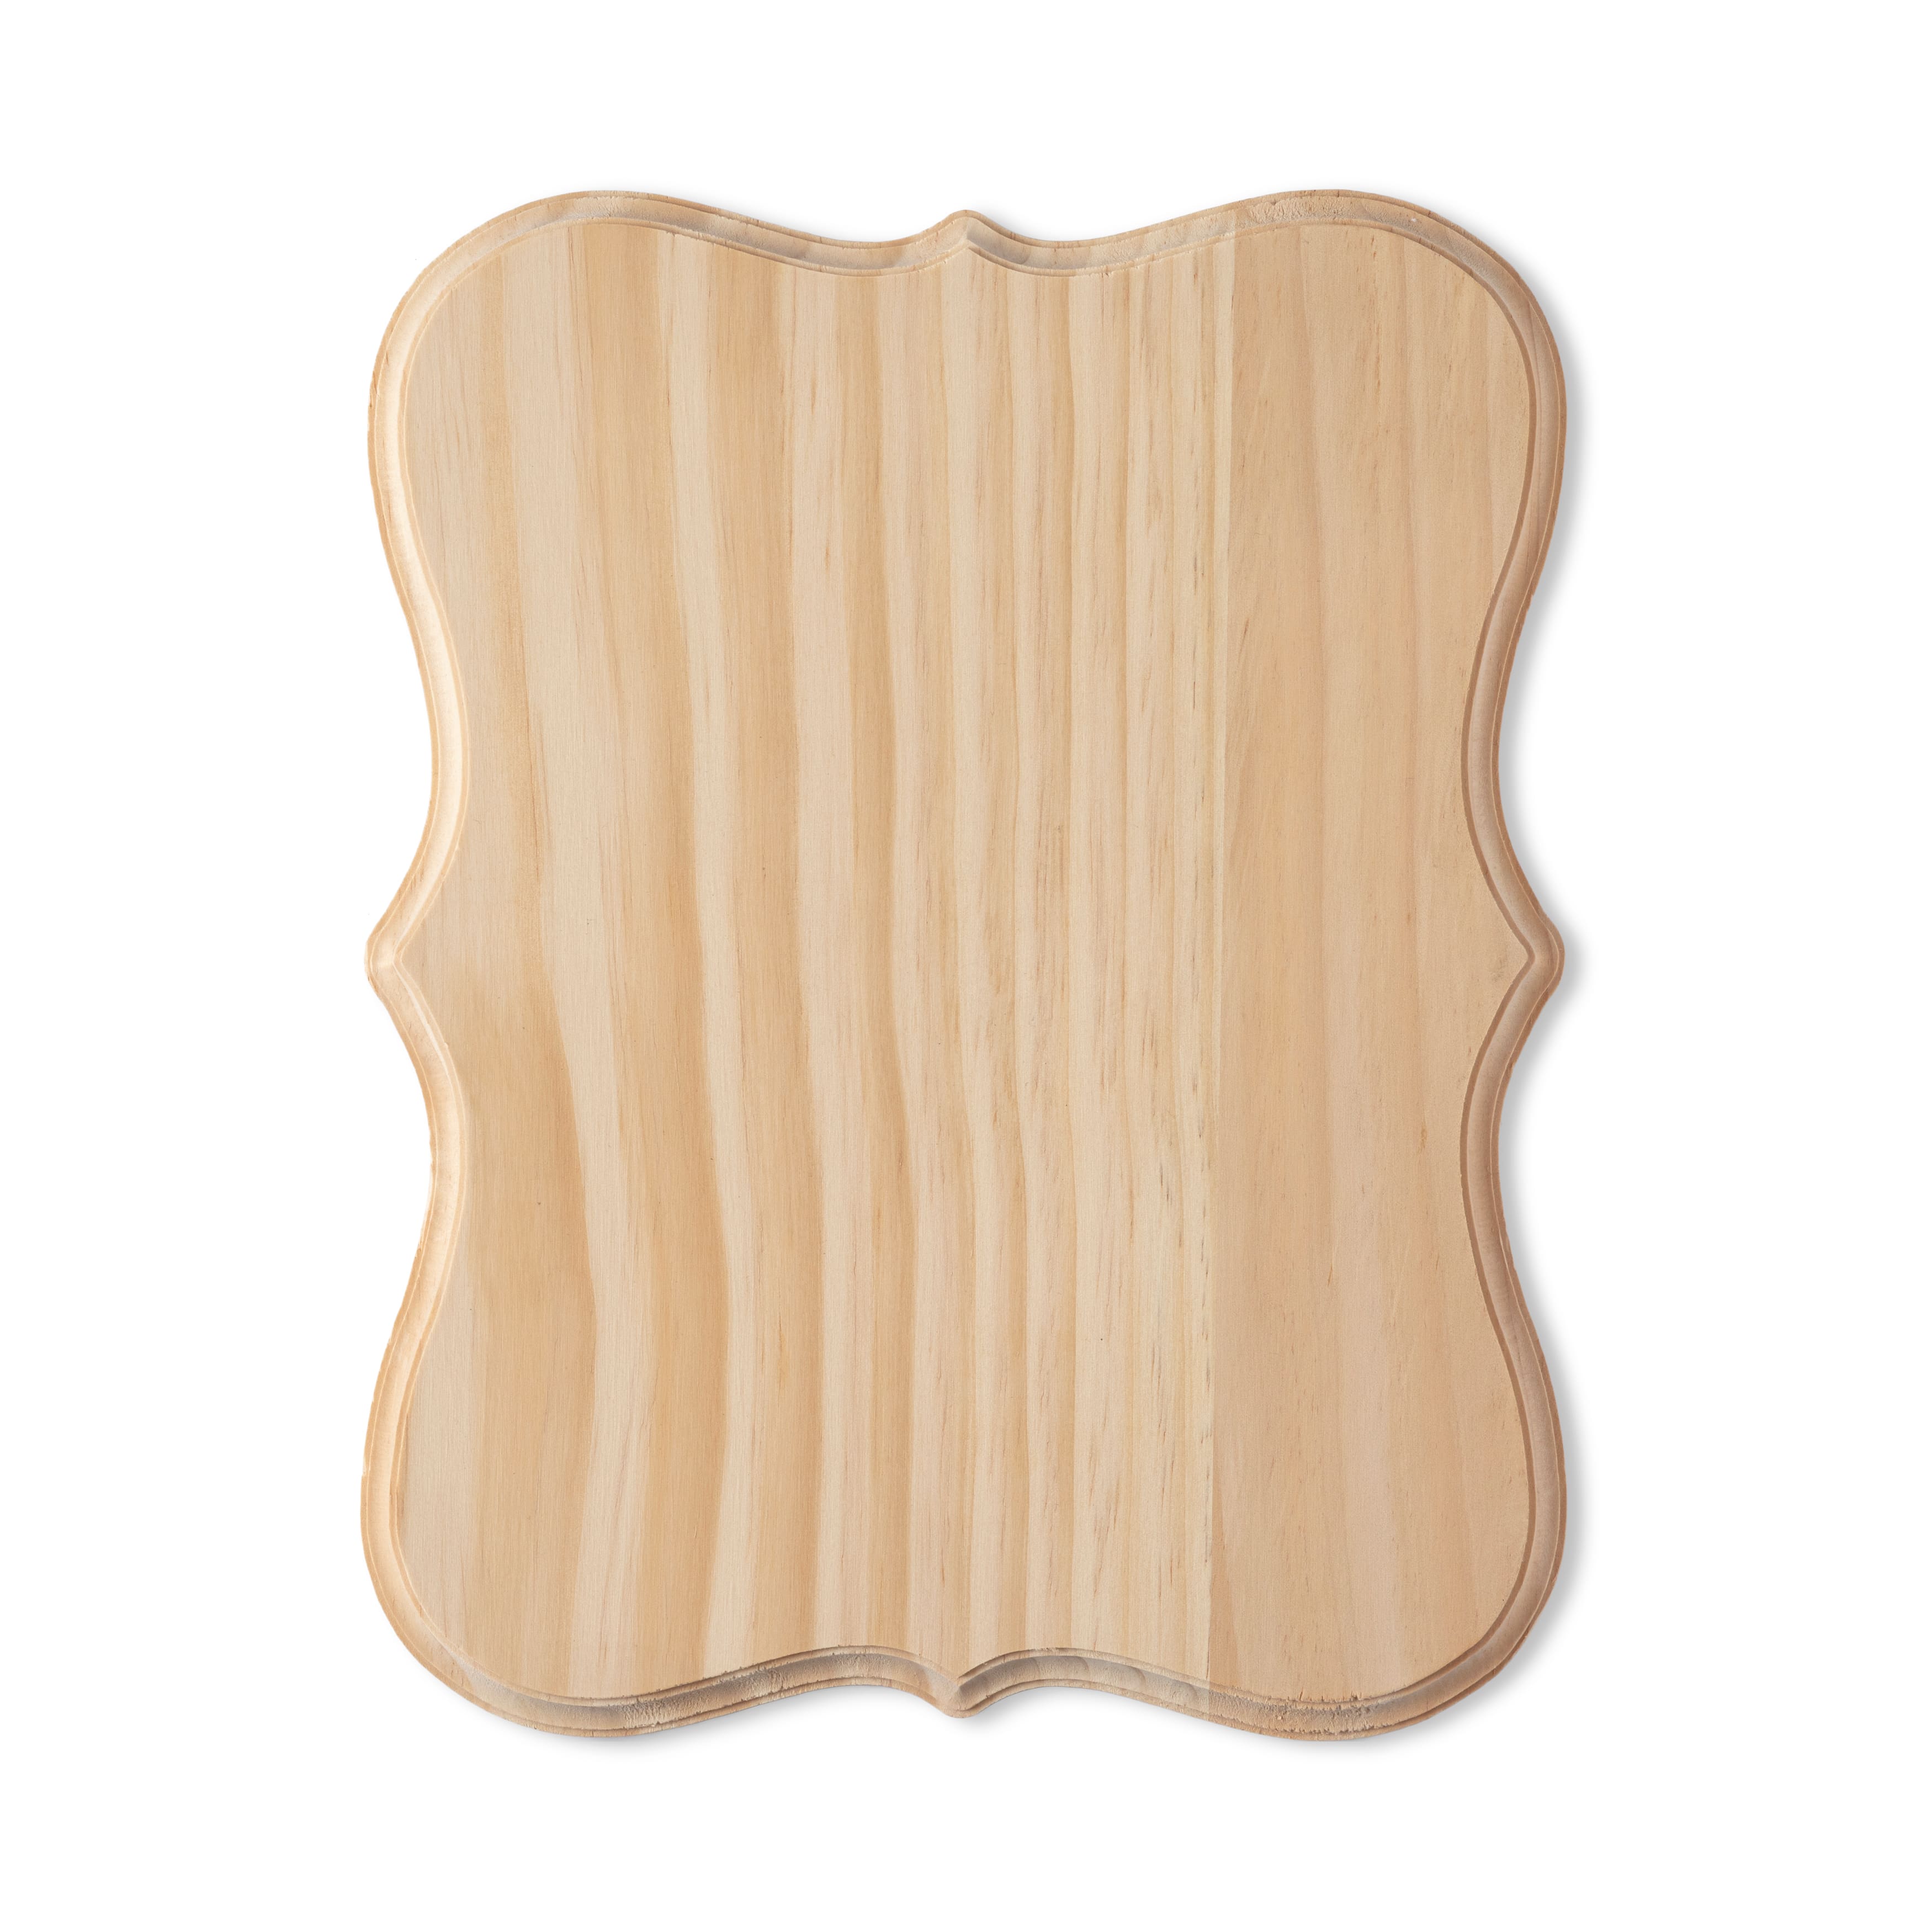 Darware Blank Wood Plaques (2-Pack, Unfinished), Natural Fir